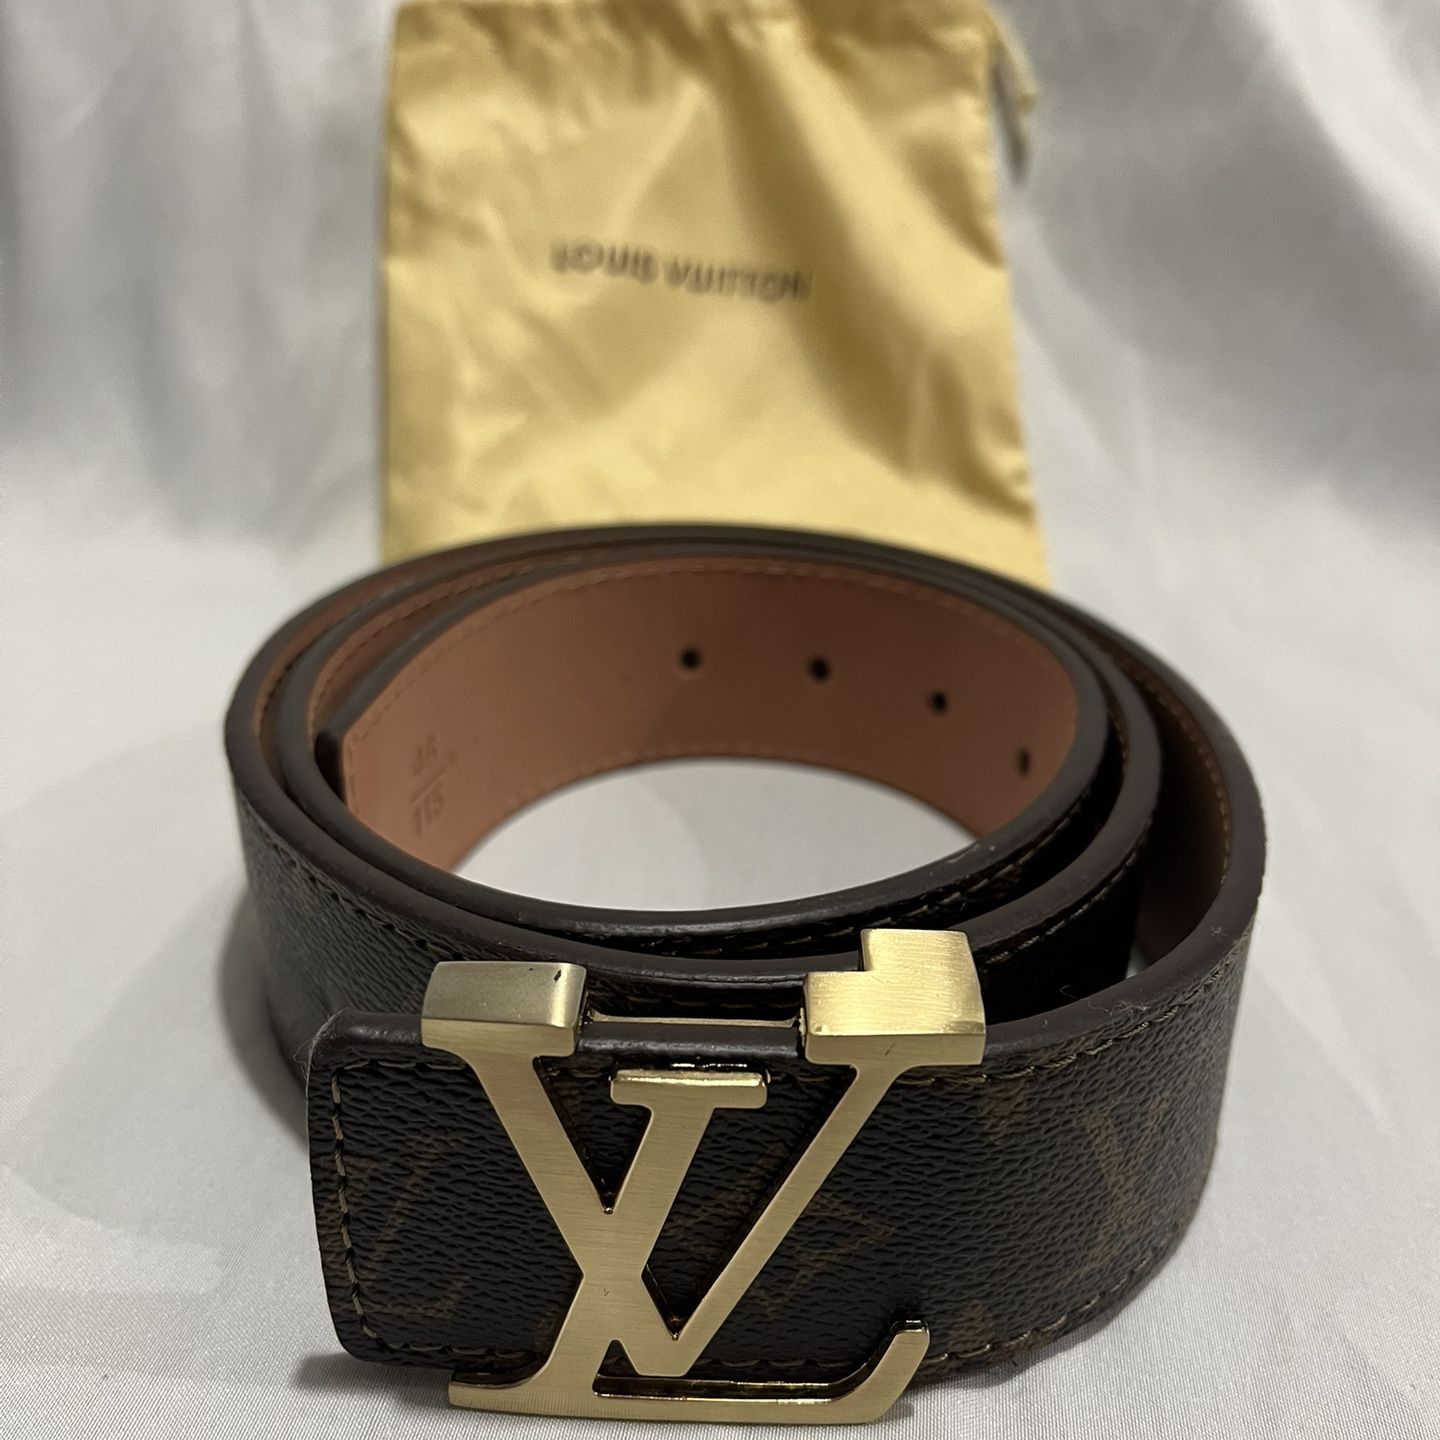 Louis Vuitton Belt for Sale in Humble, TX - OfferUp